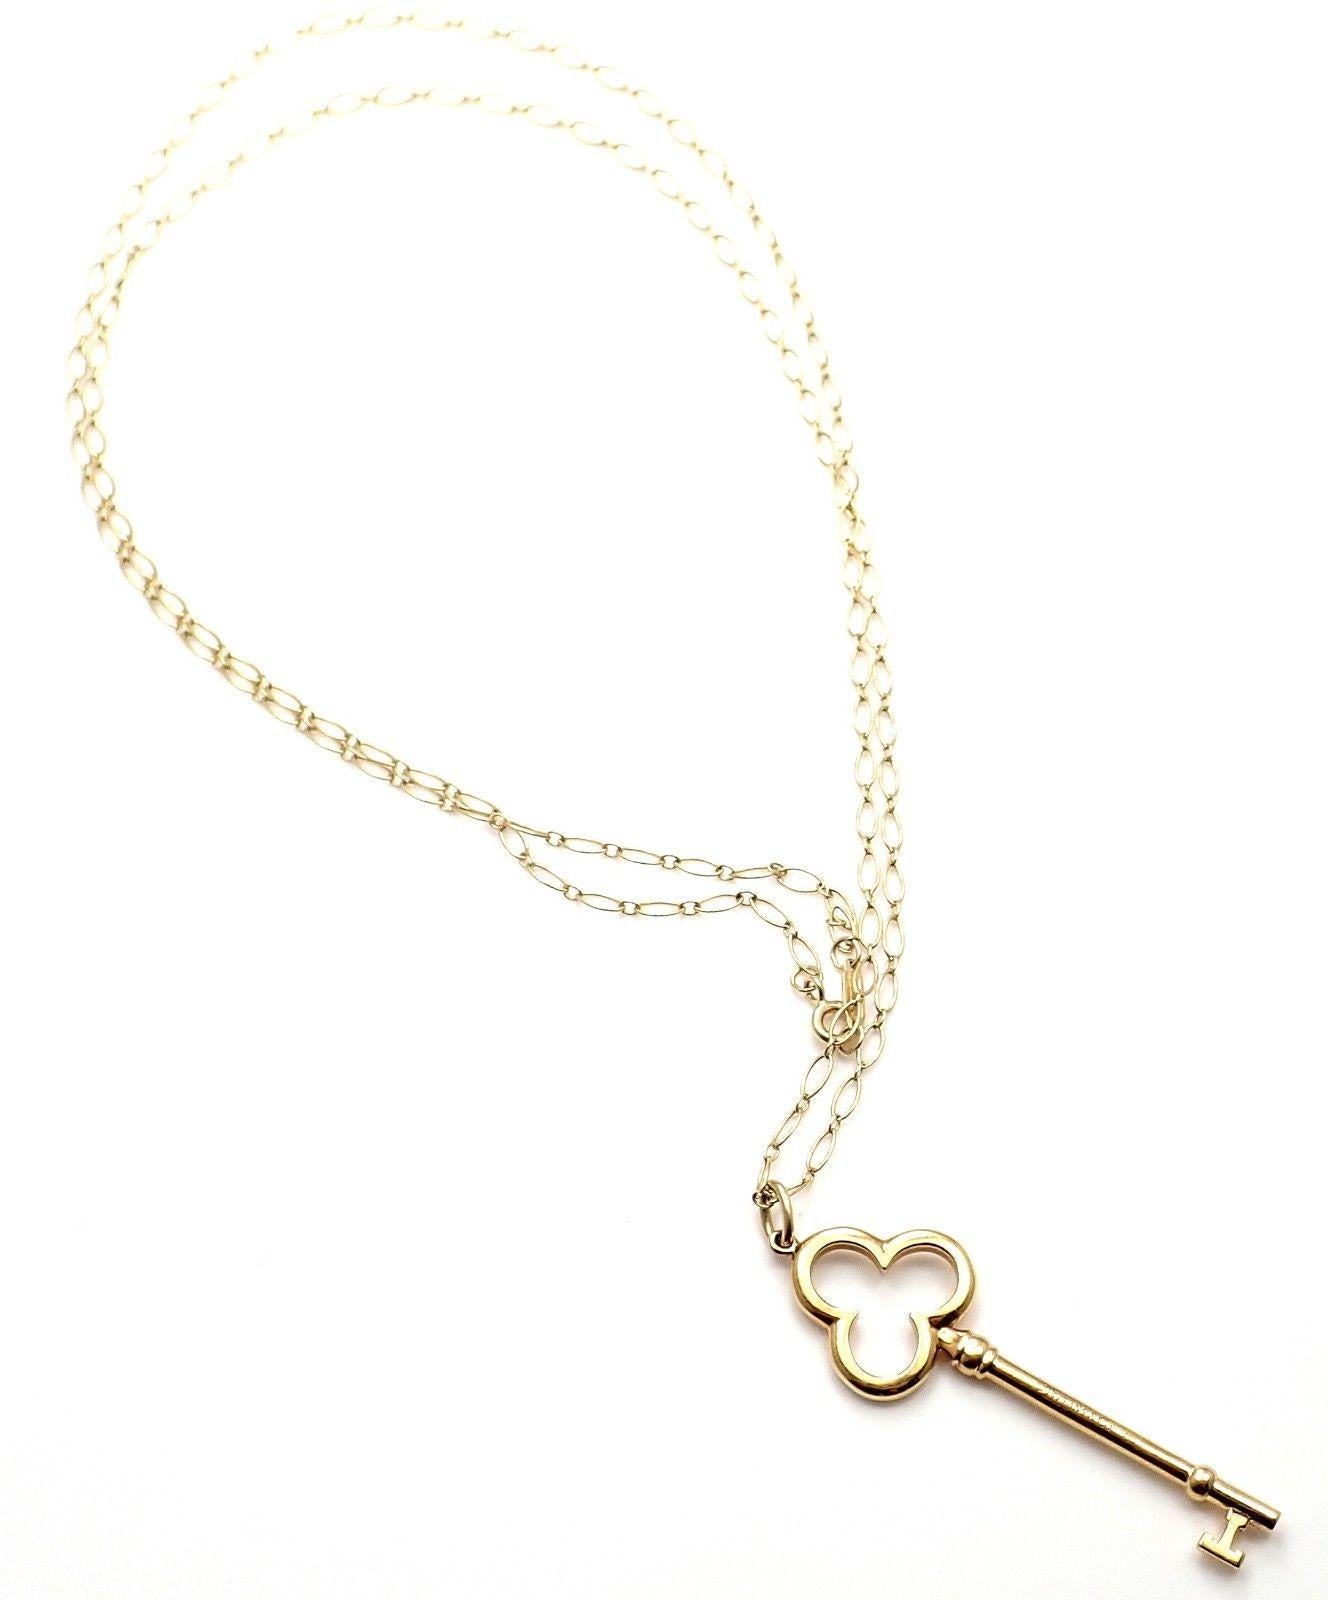 gold chain with key pendant